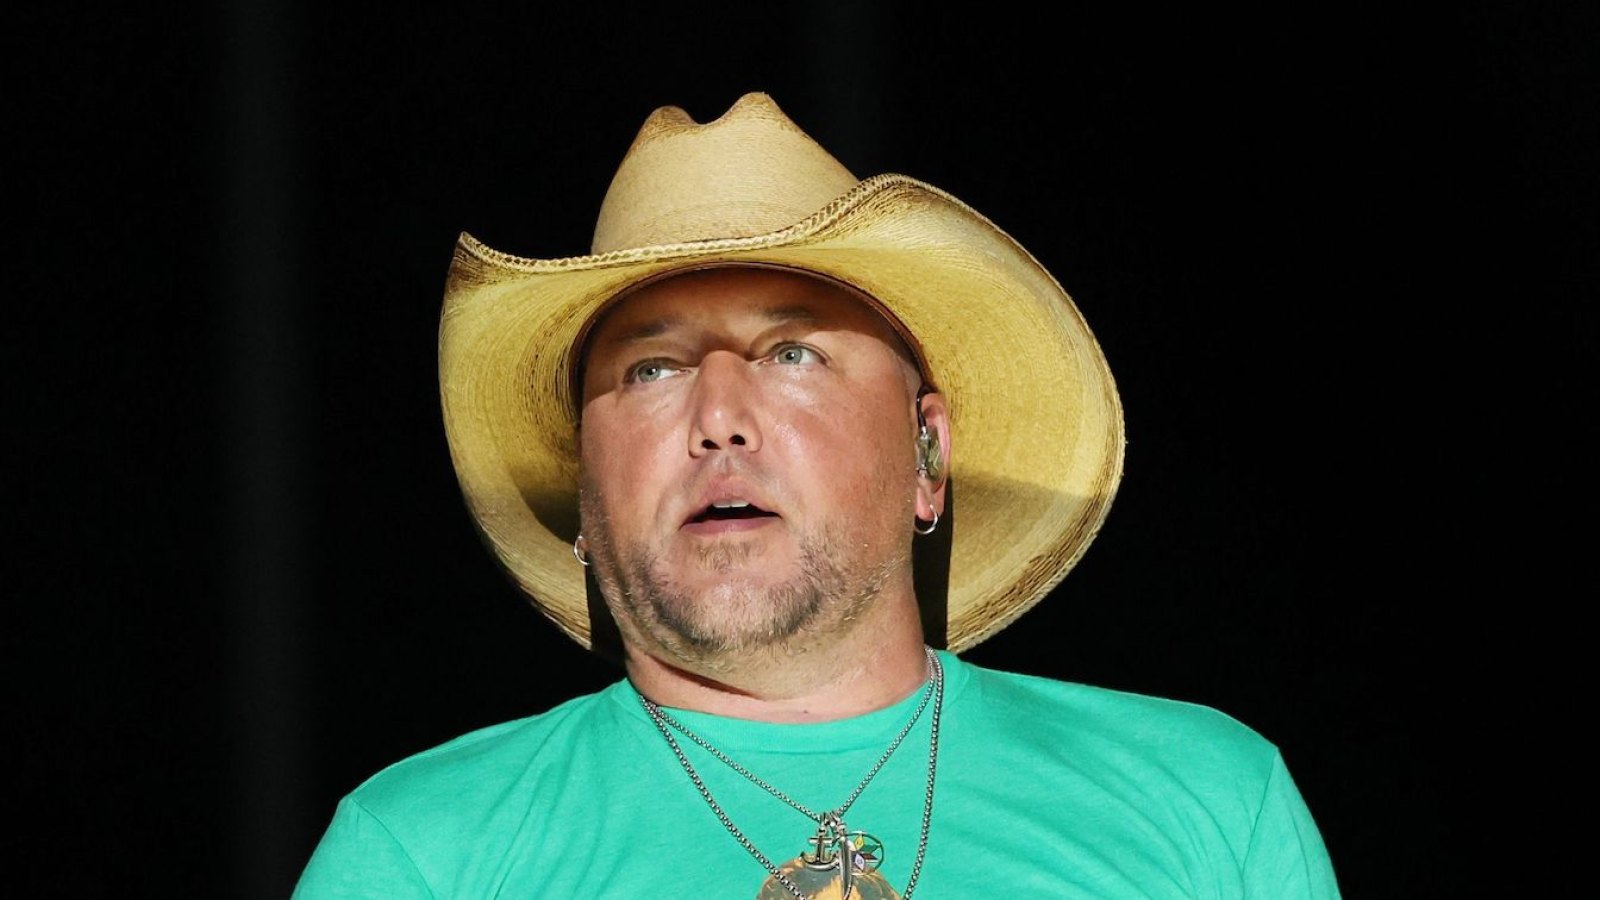 Jason Aldean Faces Backlash for Pro-Gun Lyrics in New Song Try That in a Small Town